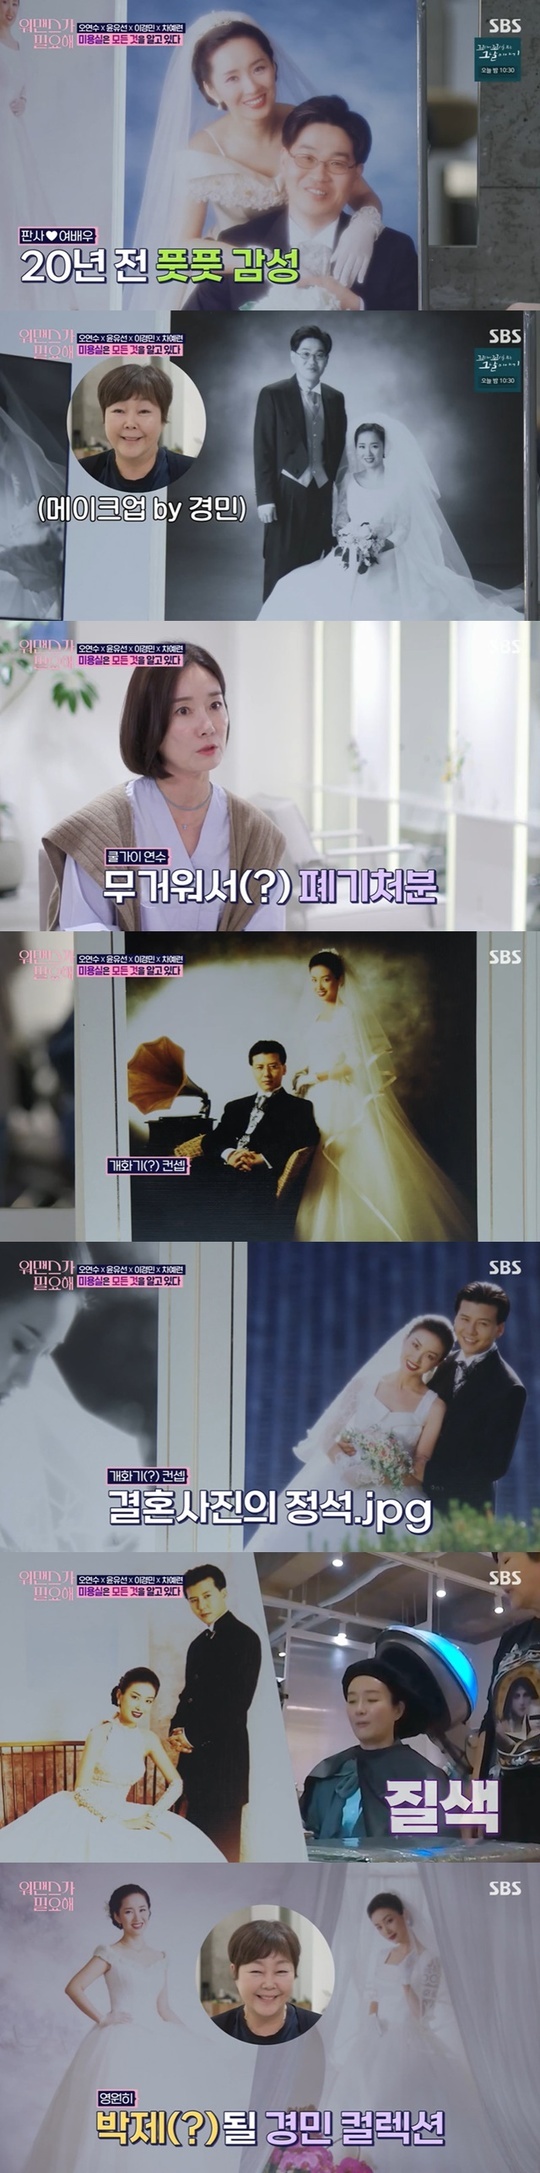 Oh Yeon-soo was surprised by the marriage album that This is the law had.On SBS One Mans War Needed broadcast on October 28, This is the law released a marriage photo of Oh Yeon-soo and Yun Yu-Seon.On this day, This is the law released Oh Yeon-soos picture and Yun Yu-Seons marriage photo, saying, Your sister has collected some pictures of you in the past.Yun Yu-Seon complained, Its 2001, please take a picture like a training session, not like this. Oh Yeon-soo refused when he recommended a remind wedding.This is the law also released the marriage album of Oh Yeon-soo and Son Ji Chang, and Oh Yeon-soo said, Why do you have a marriage album?I dont have one either. I think it was thick and big and Id dumped it. Im not home. She had it.Oh Yeon-soo said, I can not see it, but This is the law praised Oh Yeon-soos marriage photo, saying, People are all the same.